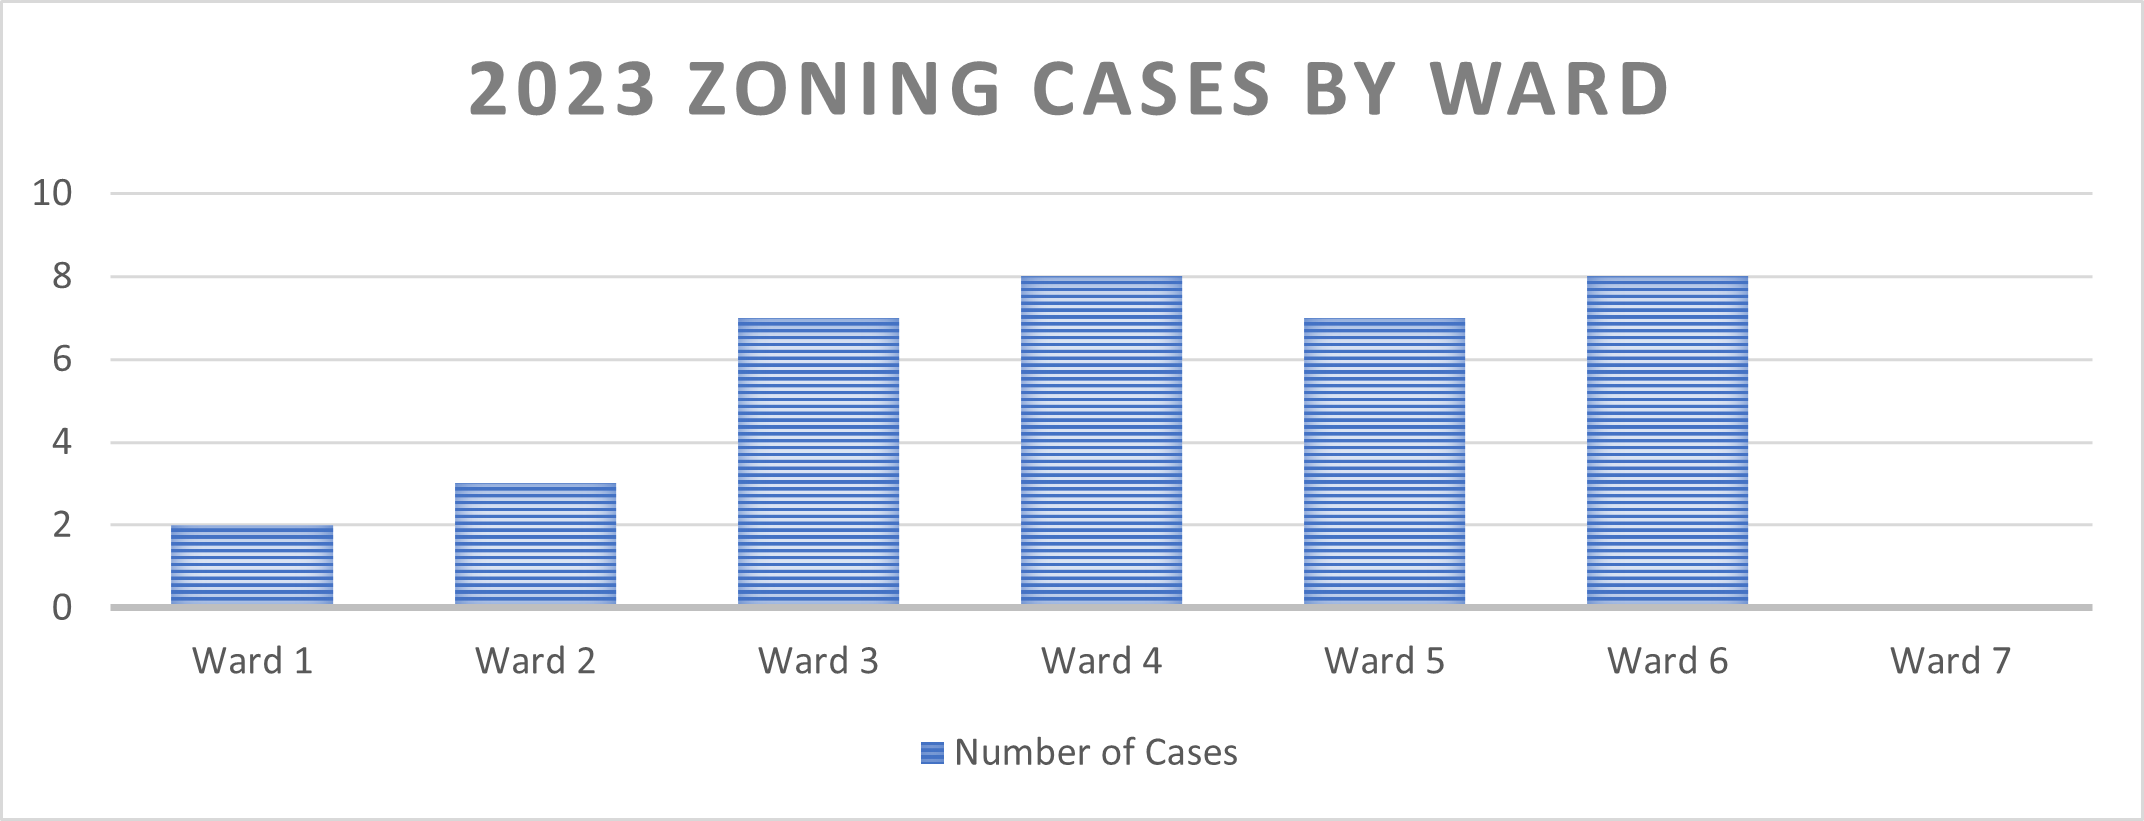 Figure 3 - Zoning Cases by Ward, 2023